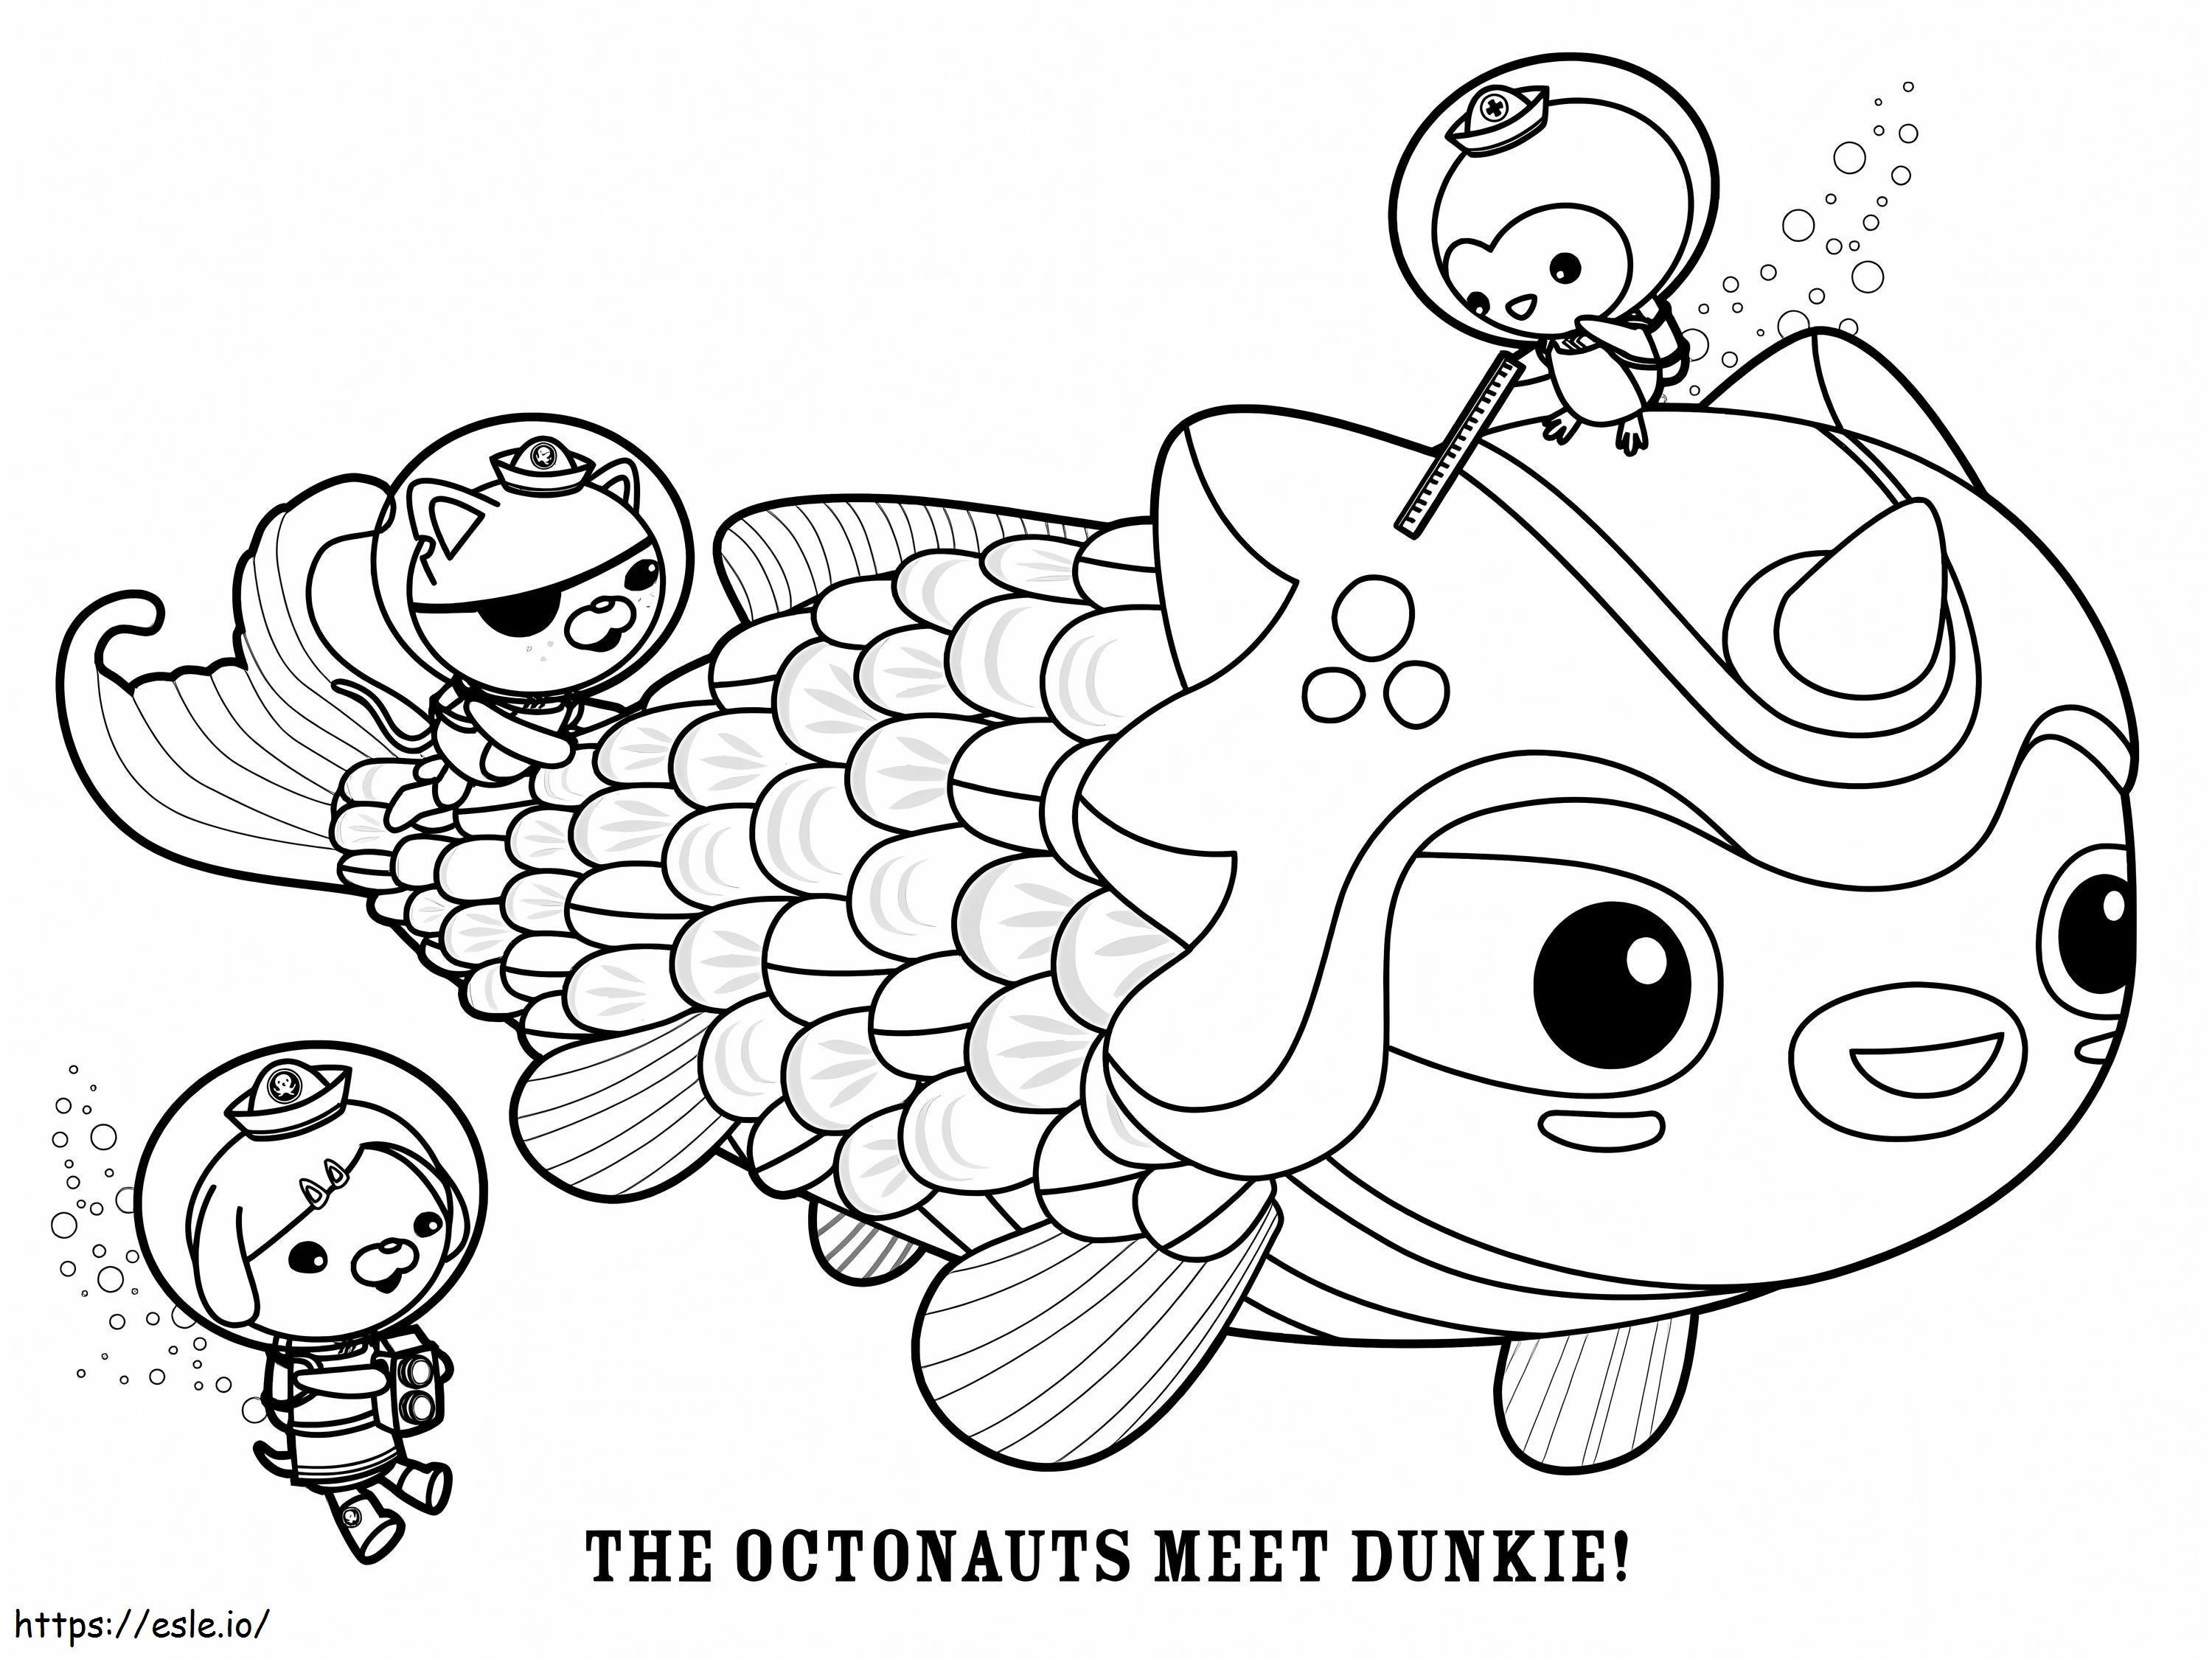 The Octonauts Meet Dunkie coloring page